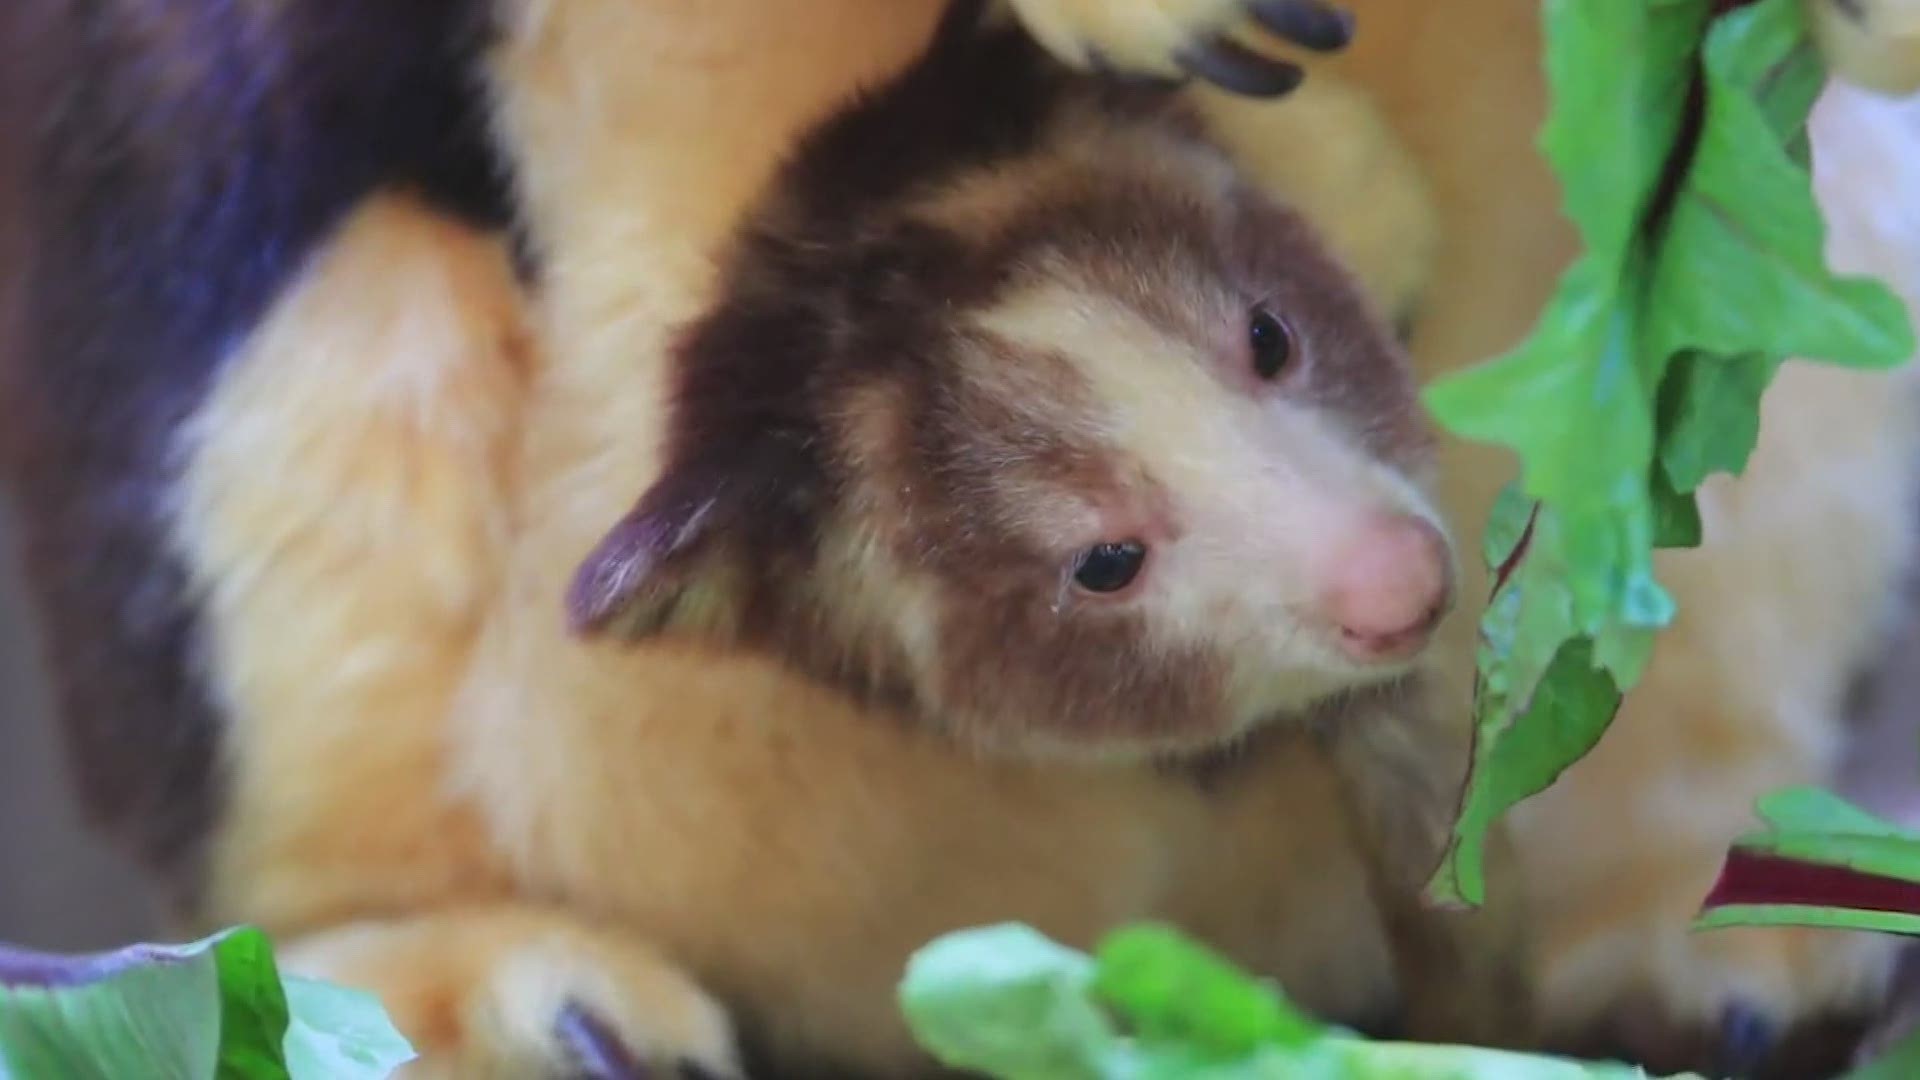 The Woodland Park Zoo is featured for its work in helping to save the endangered tree kangaroo from extinction.